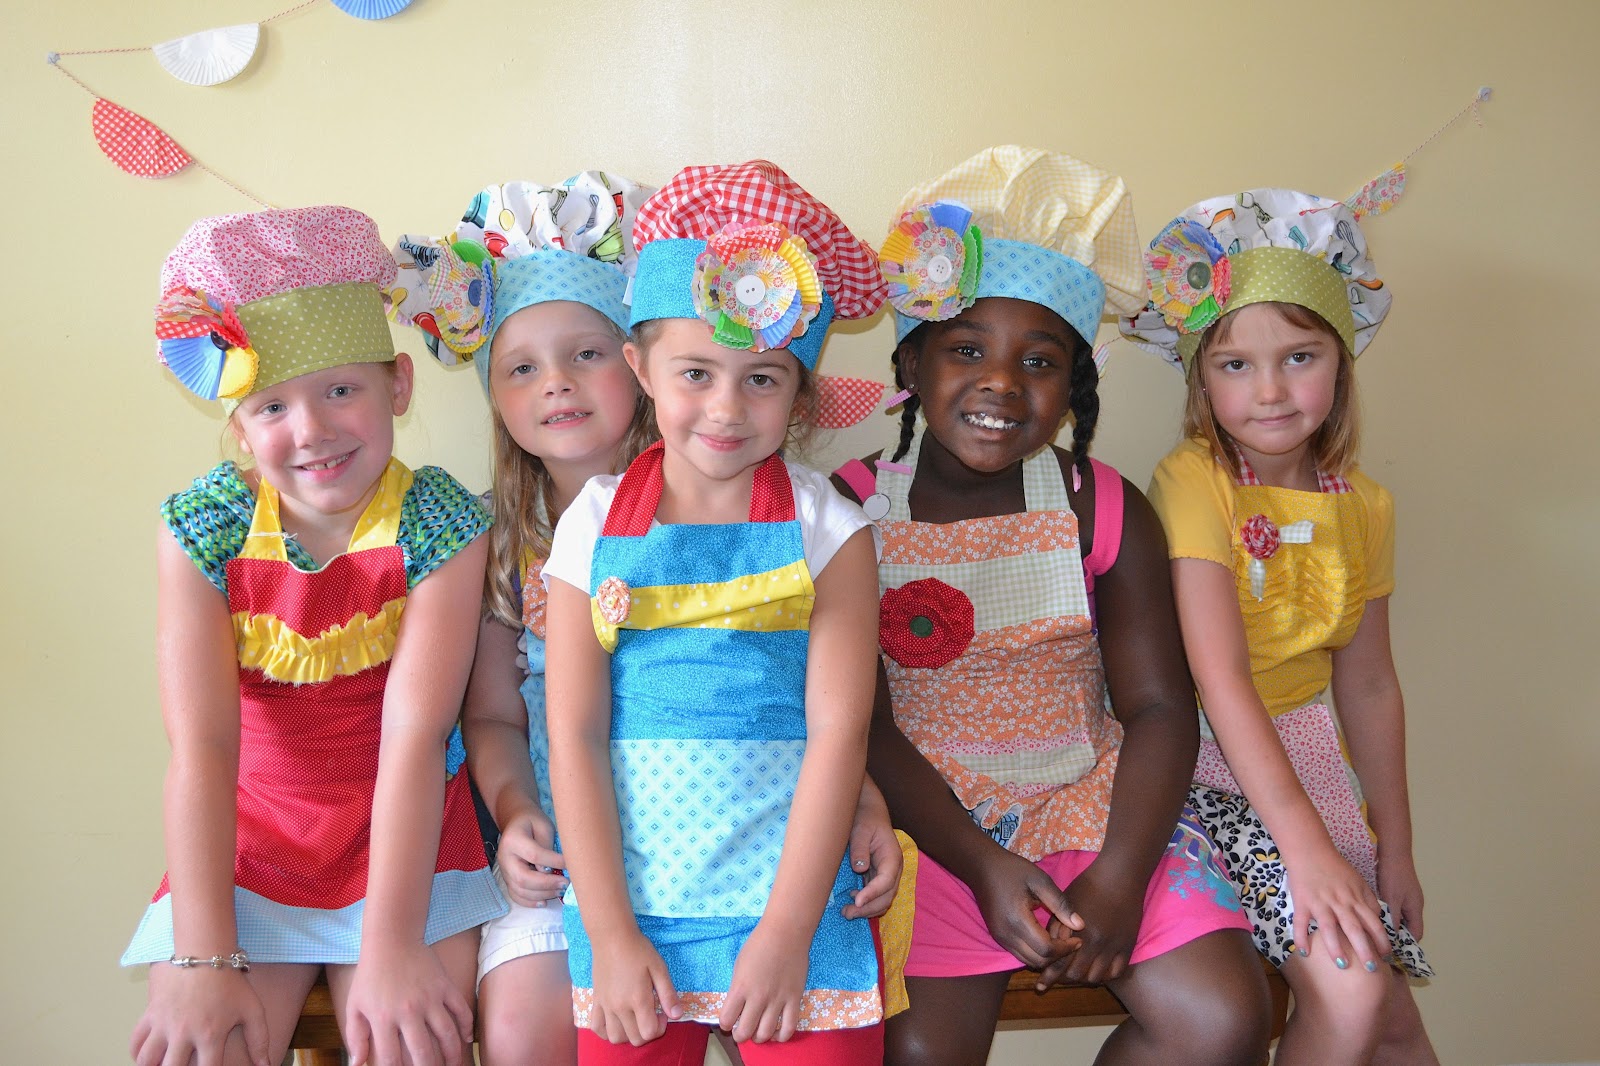 From The Hive: cake decorating birthday party